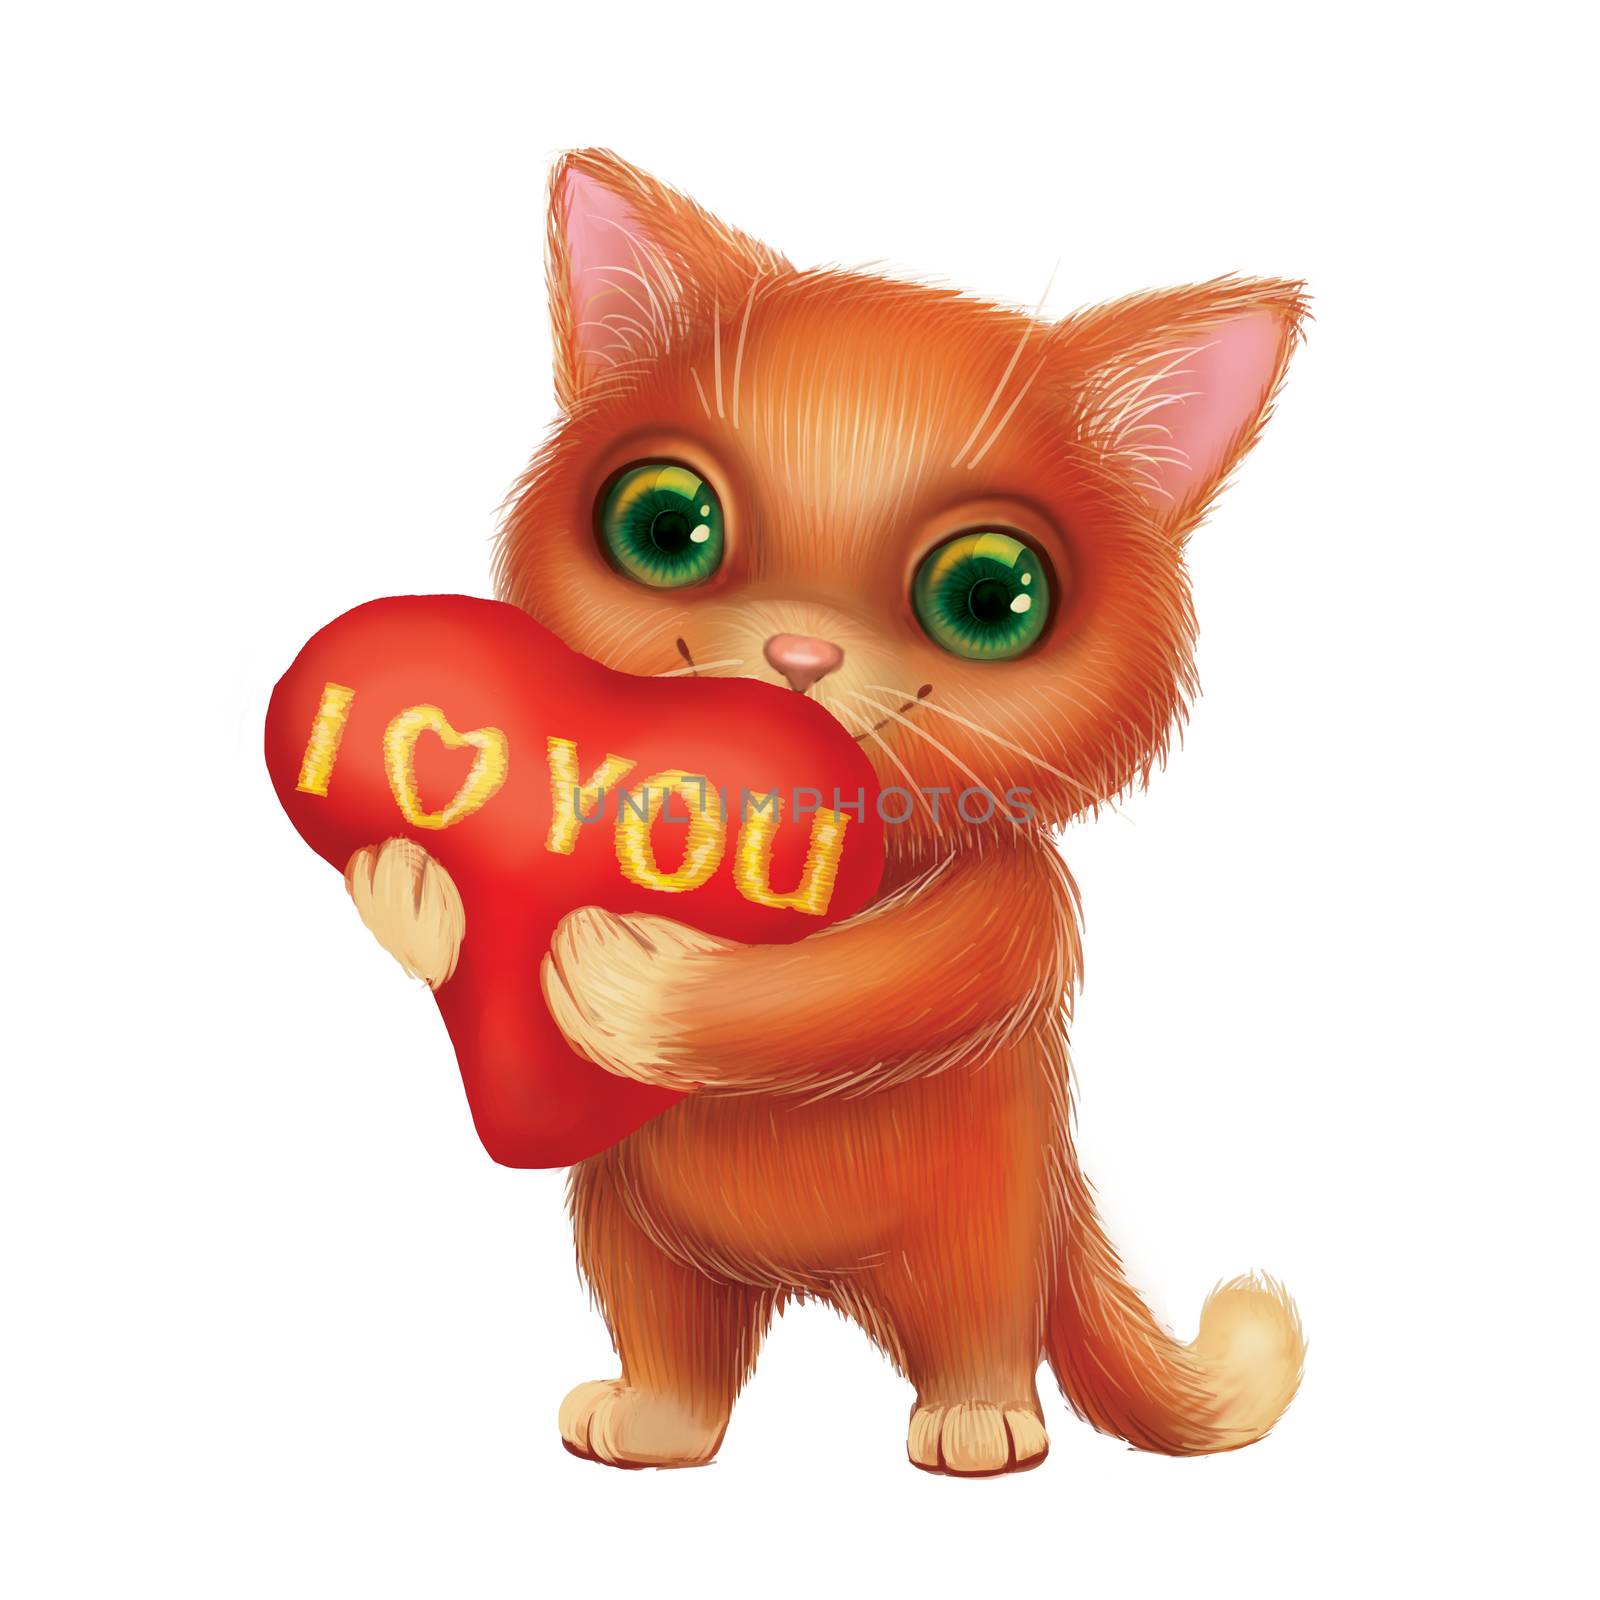 Cute Smiling Kitten Holding Heart Sign with I Love You Confession of Feelings by Loud-Mango